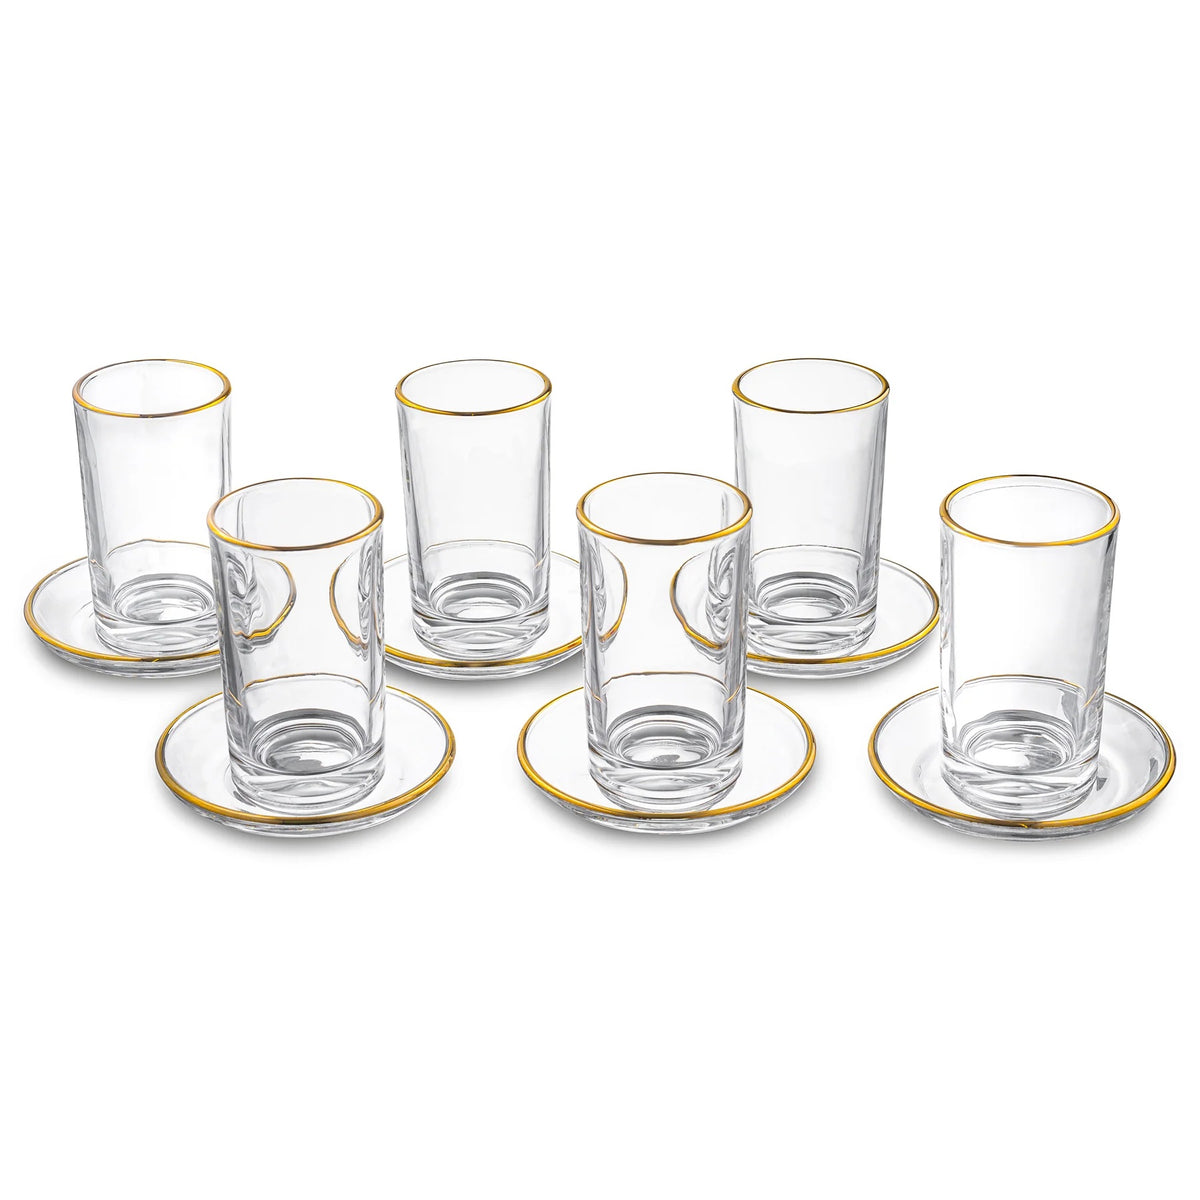 Waterdale Modern Glass Cups & Saucers, Set Of 6, Assorted Rim Colors